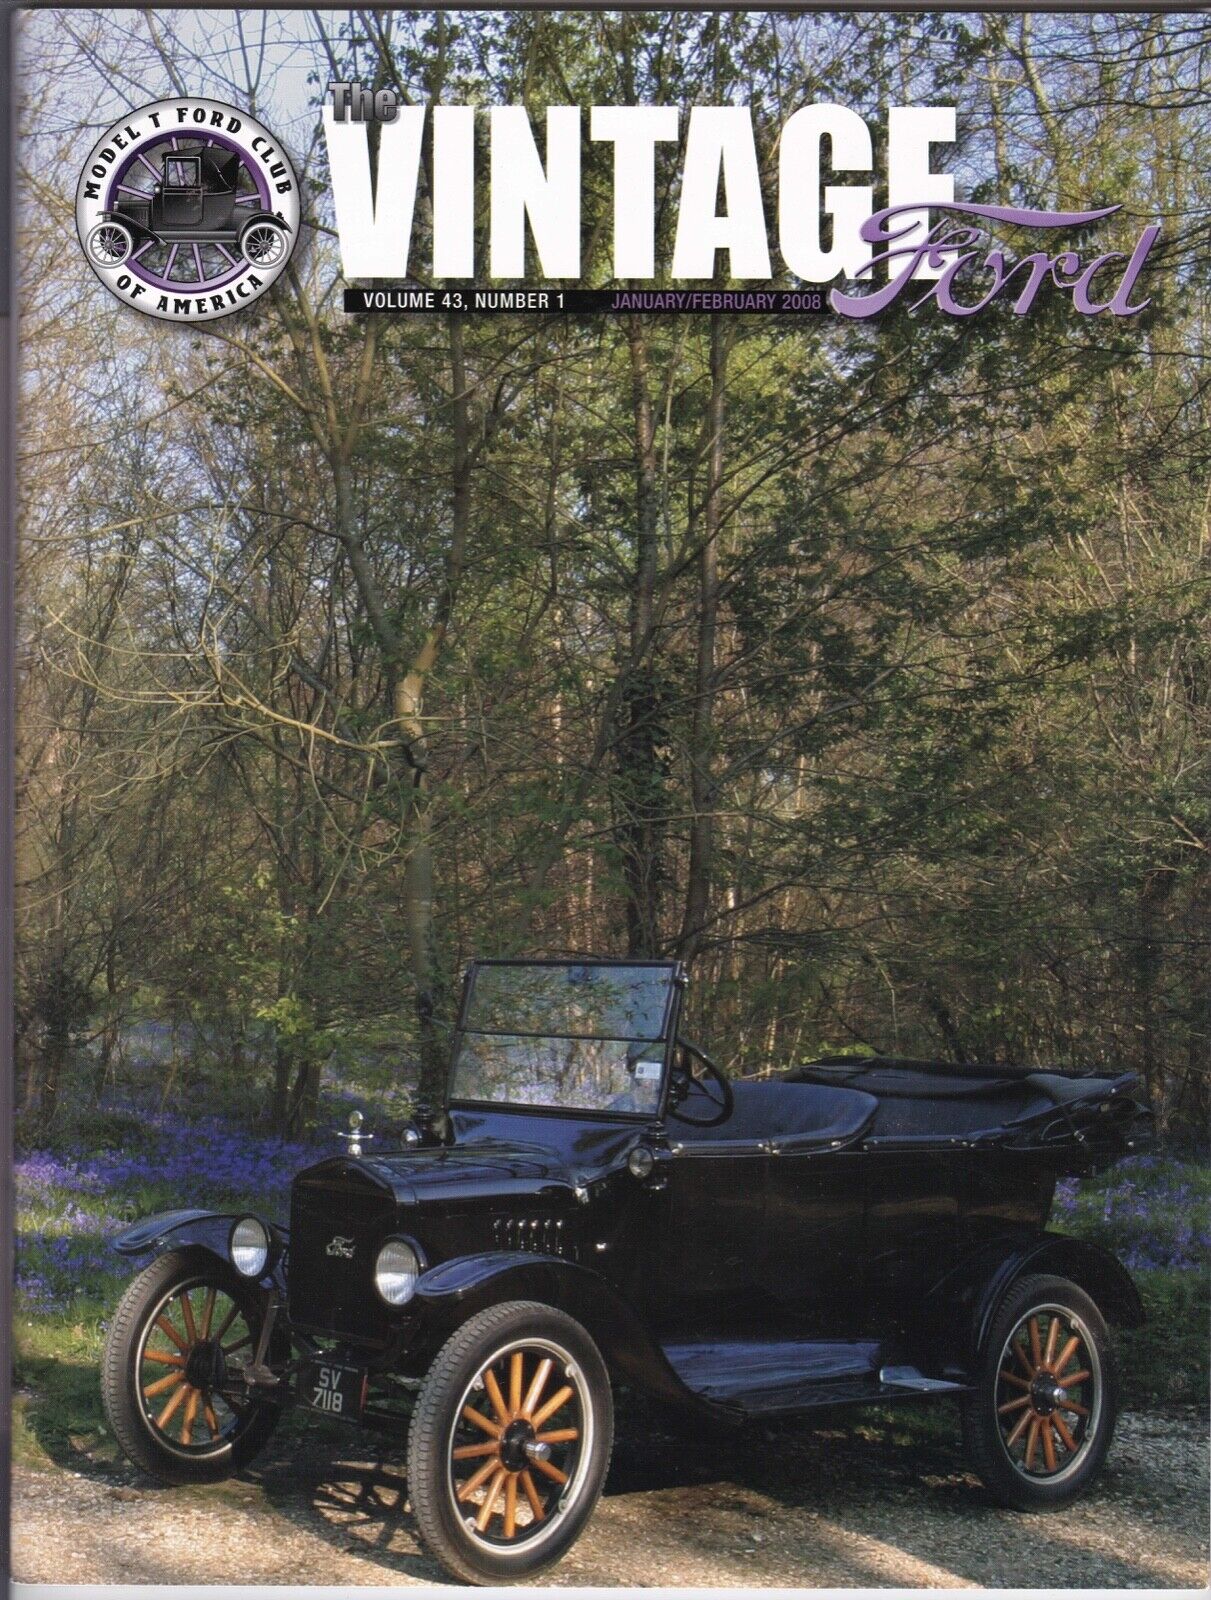 SHIPPED TO UK -THE VINTAGE FORD MAGAZINE- FROM HALLETTSVILLE, TEXAS- RUSTY WRECK